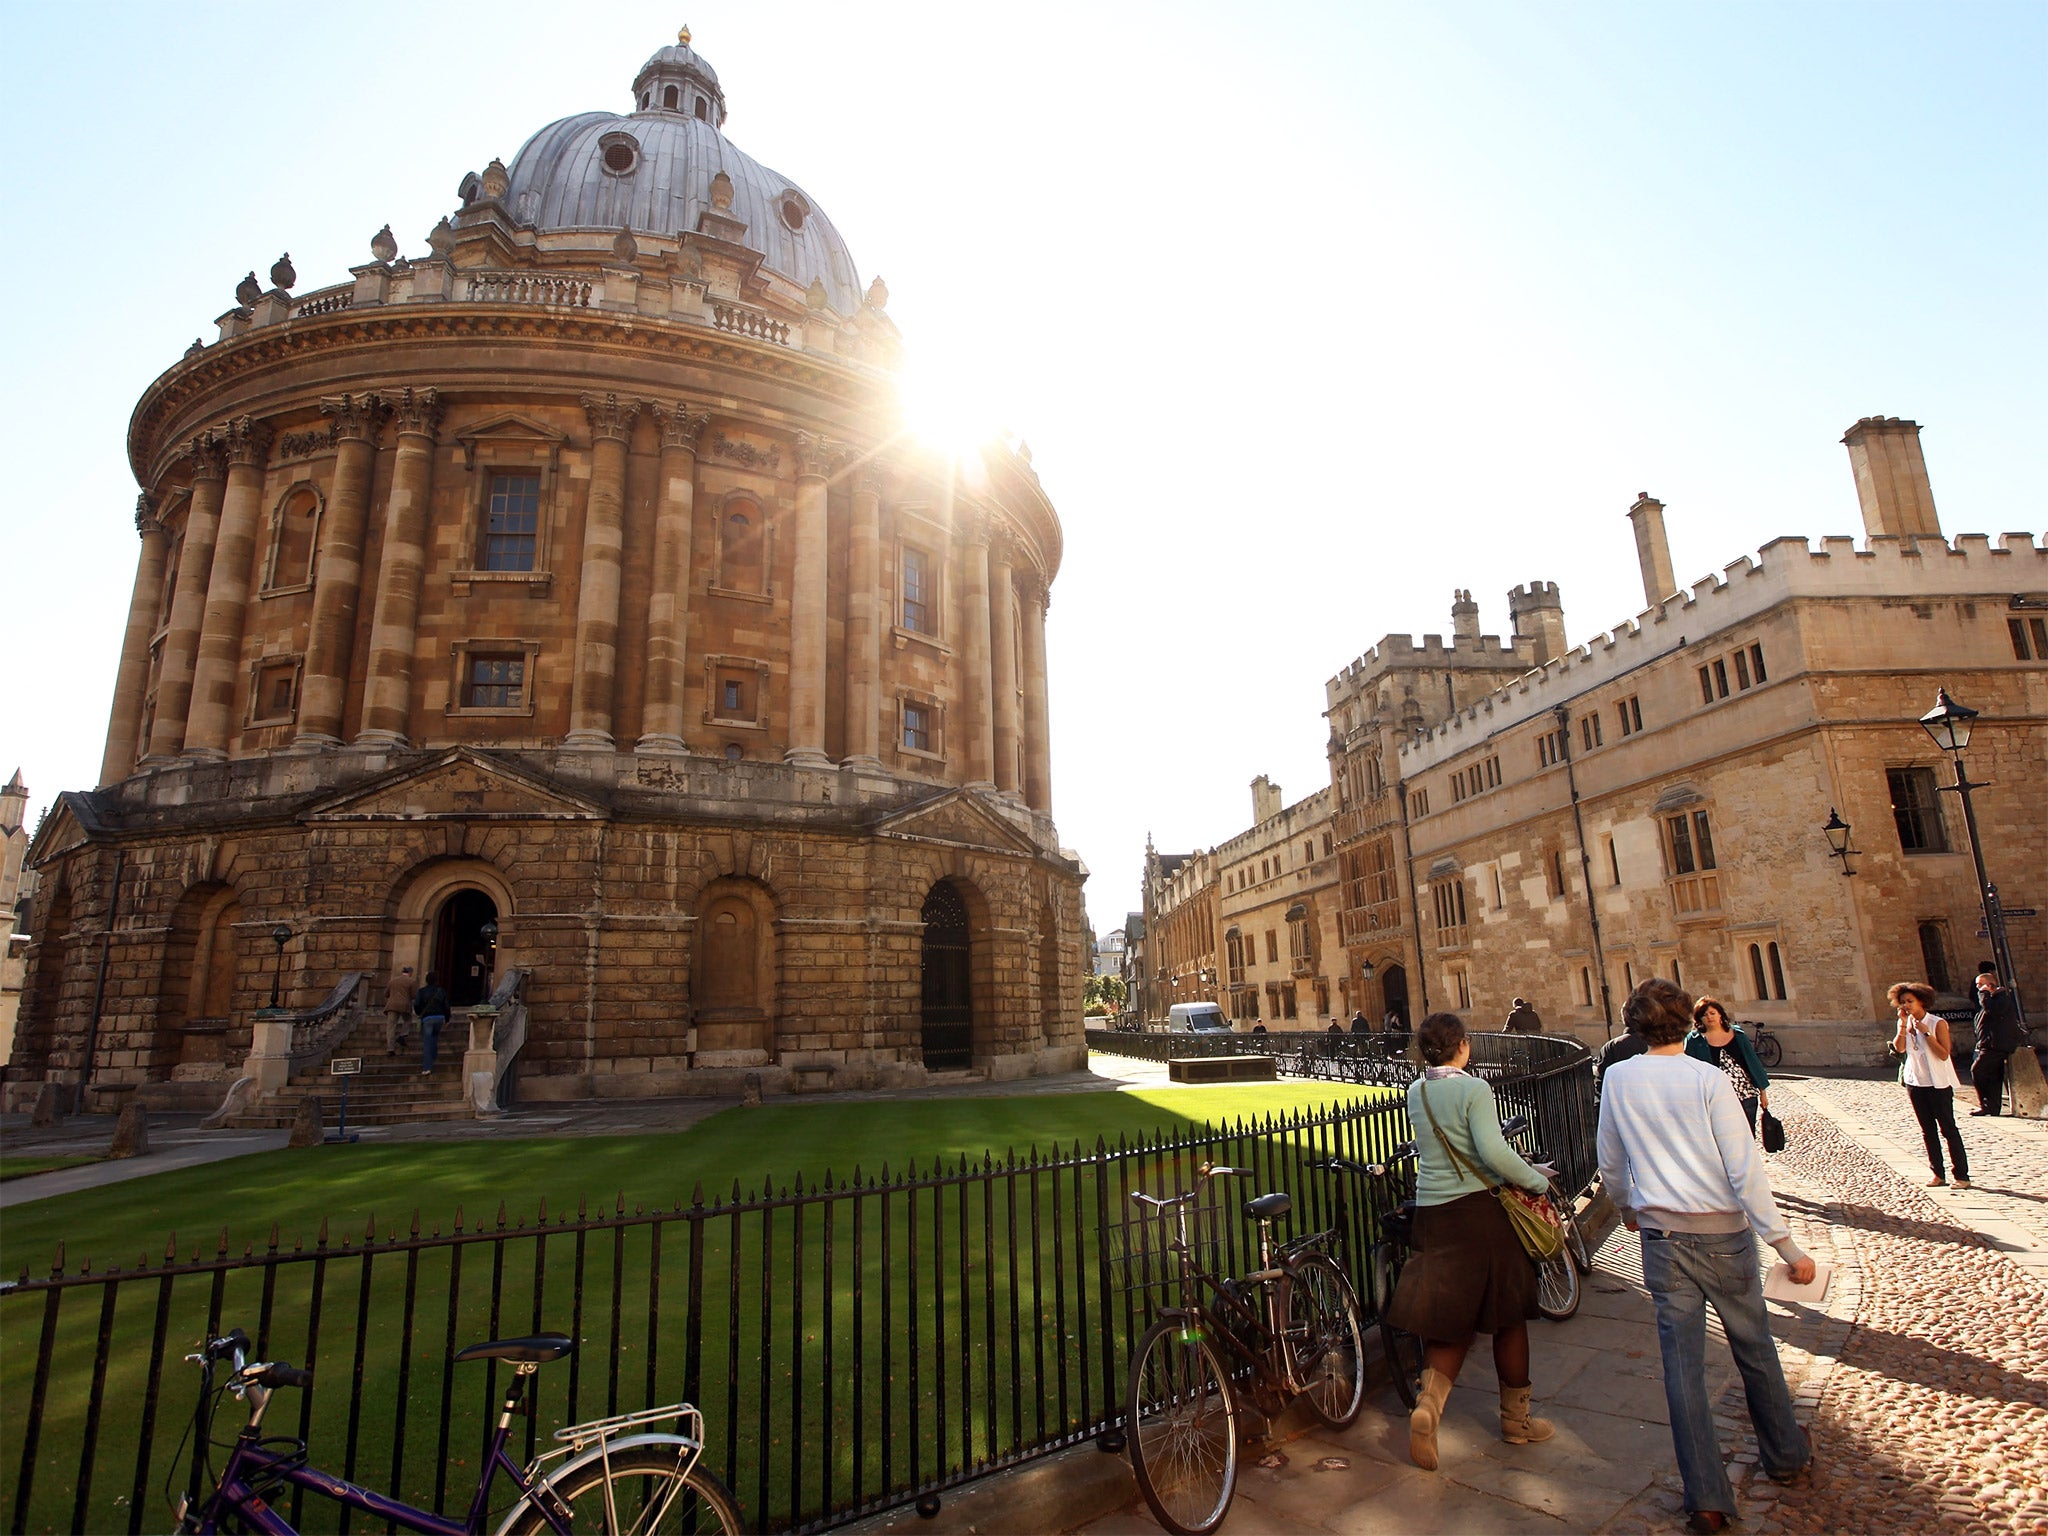 Oxford University has a student population in excess of 20,000 taken from over 140 countries around the world